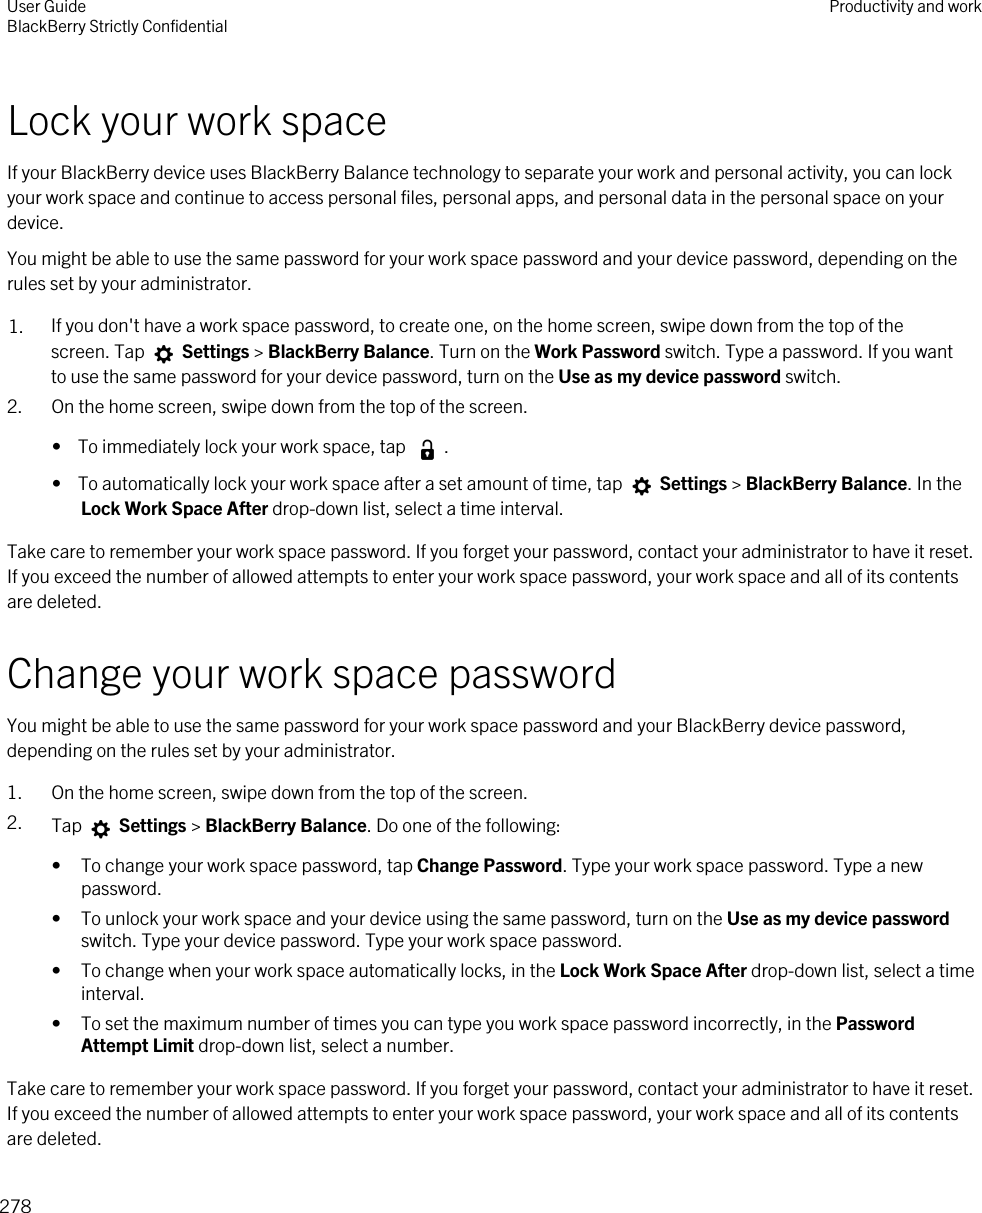 Lock your work spaceIf your BlackBerry device uses BlackBerry Balance technology to separate your work and personal activity, you can lock your work space and continue to access personal files, personal apps, and personal data in the personal space on your device.You might be able to use the same password for your work space password and your device password, depending on the rules set by your administrator.1. If you don&apos;t have a work space password, to create one, on the home screen, swipe down from the top of the screen. Tap   Settings &gt; BlackBerry Balance. Turn on the Work Password switch. Type a password. If you want to use the same password for your device password, turn on the Use as my device password switch.2. On the home screen, swipe down from the top of the screen.•  To immediately lock your work space, tap  .•  To automatically lock your work space after a set amount of time, tap   Settings &gt; BlackBerry Balance. In the Lock Work Space After drop-down list, select a time interval.Take care to remember your work space password. If you forget your password, contact your administrator to have it reset. If you exceed the number of allowed attempts to enter your work space password, your work space and all of its contents are deleted.Change your work space passwordYou might be able to use the same password for your work space password and your BlackBerry device password, depending on the rules set by your administrator.1. On the home screen, swipe down from the top of the screen.2. Tap   Settings &gt; BlackBerry Balance. Do one of the following:• To change your work space password, tap Change Password. Type your work space password. Type a new password.• To unlock your work space and your device using the same password, turn on the Use as my device password switch. Type your device password. Type your work space password.• To change when your work space automatically locks, in the Lock Work Space After drop-down list, select a time interval.• To set the maximum number of times you can type you work space password incorrectly, in the Password Attempt Limit drop-down list, select a number.Take care to remember your work space password. If you forget your password, contact your administrator to have it reset. If you exceed the number of allowed attempts to enter your work space password, your work space and all of its contents are deleted.User GuideBlackBerry Strictly Confidential Productivity and work278